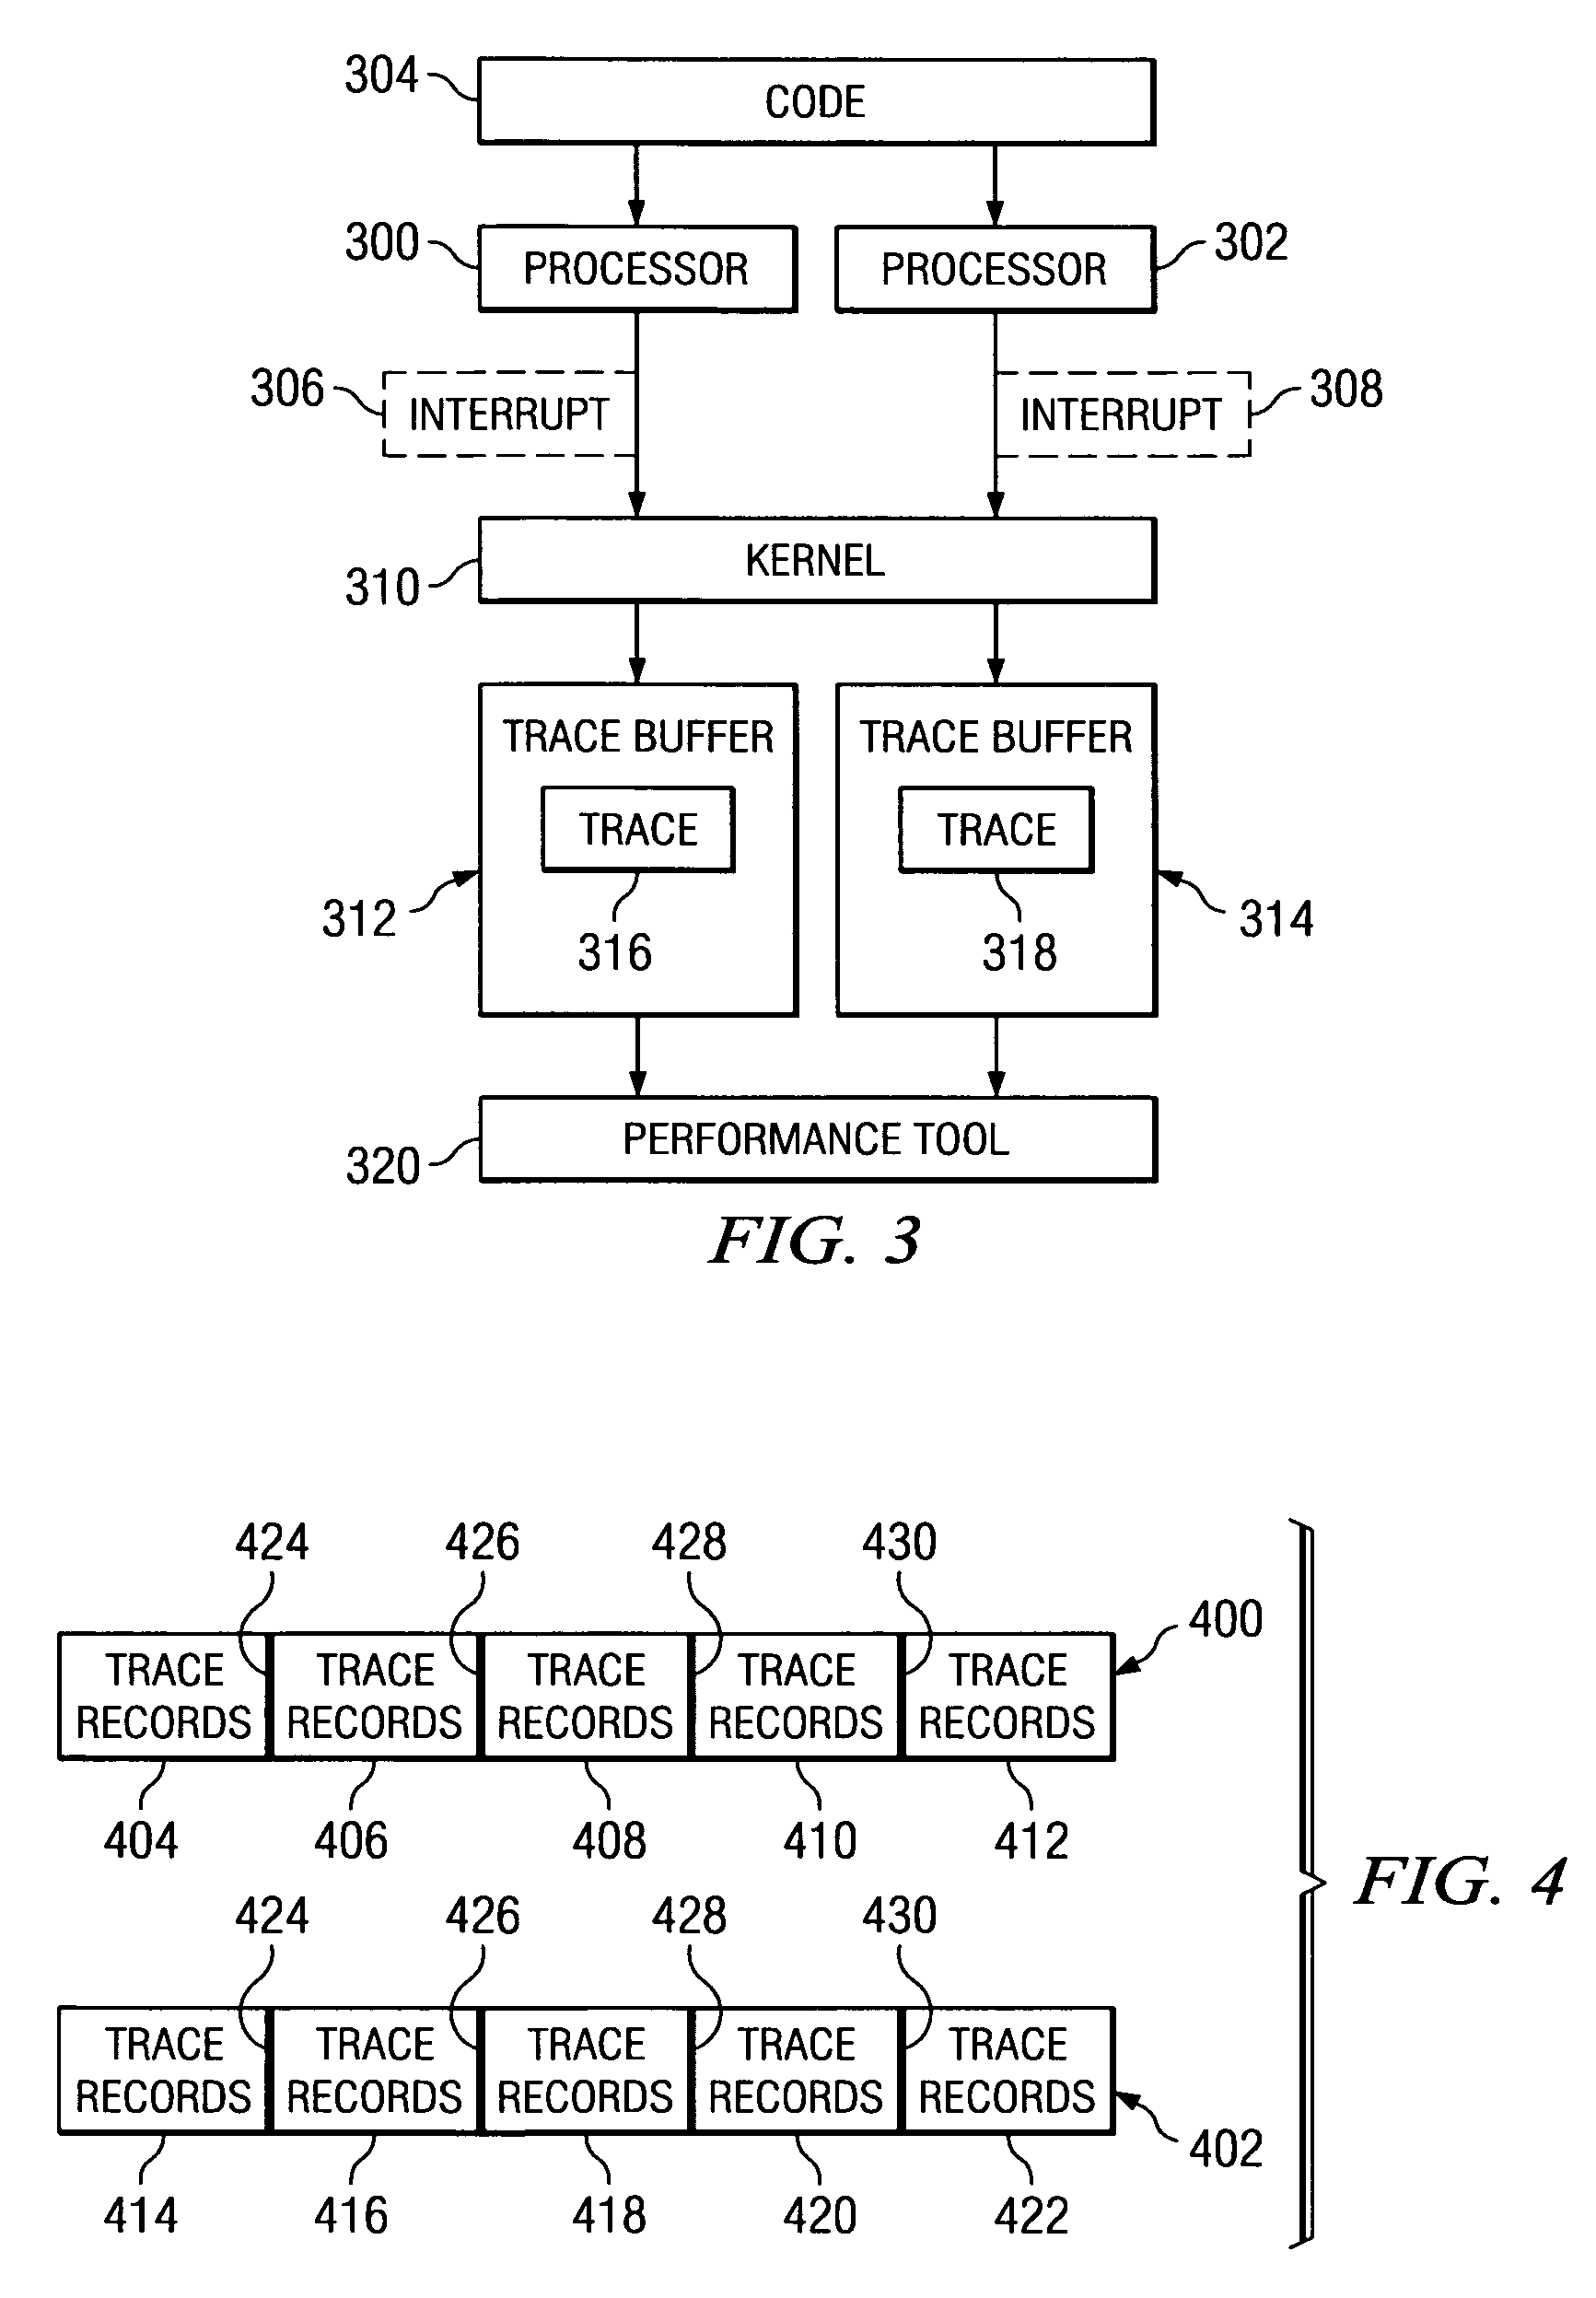 Method and apparatus for adaptive tracing with different processor frequencies